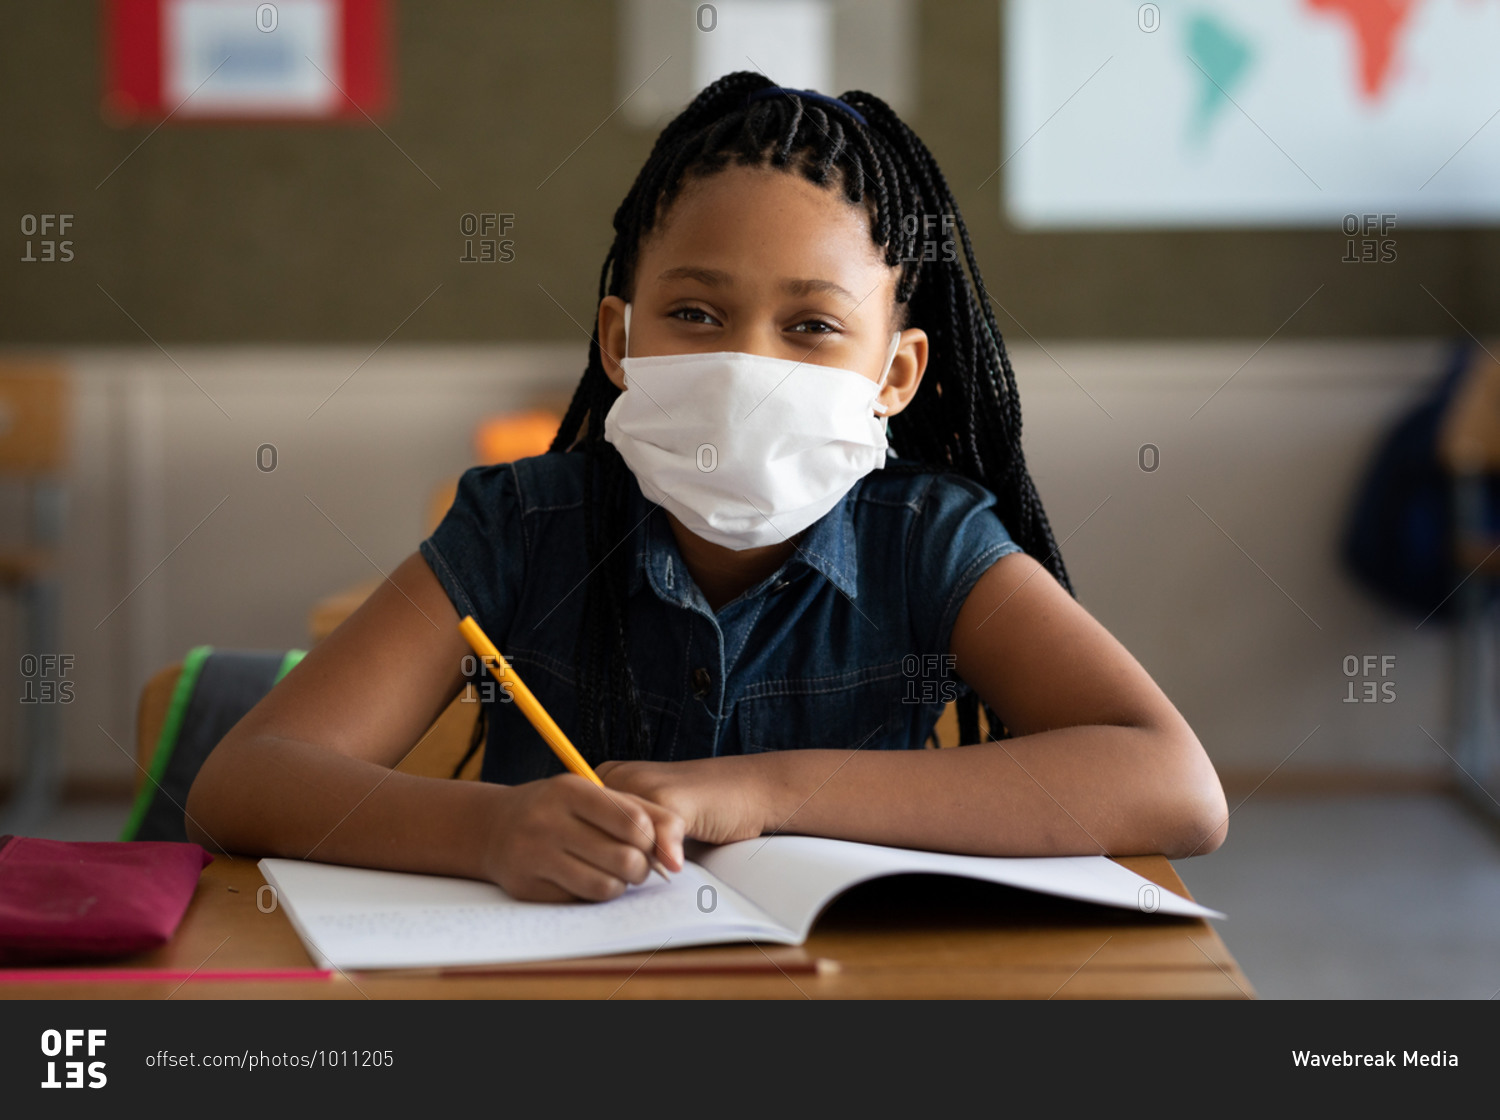 Portrait of a mixed race girl sitting at desk wearing face mask in classroom. Primary education social distancing health safety during Covid19 Coronavirus pandemic.